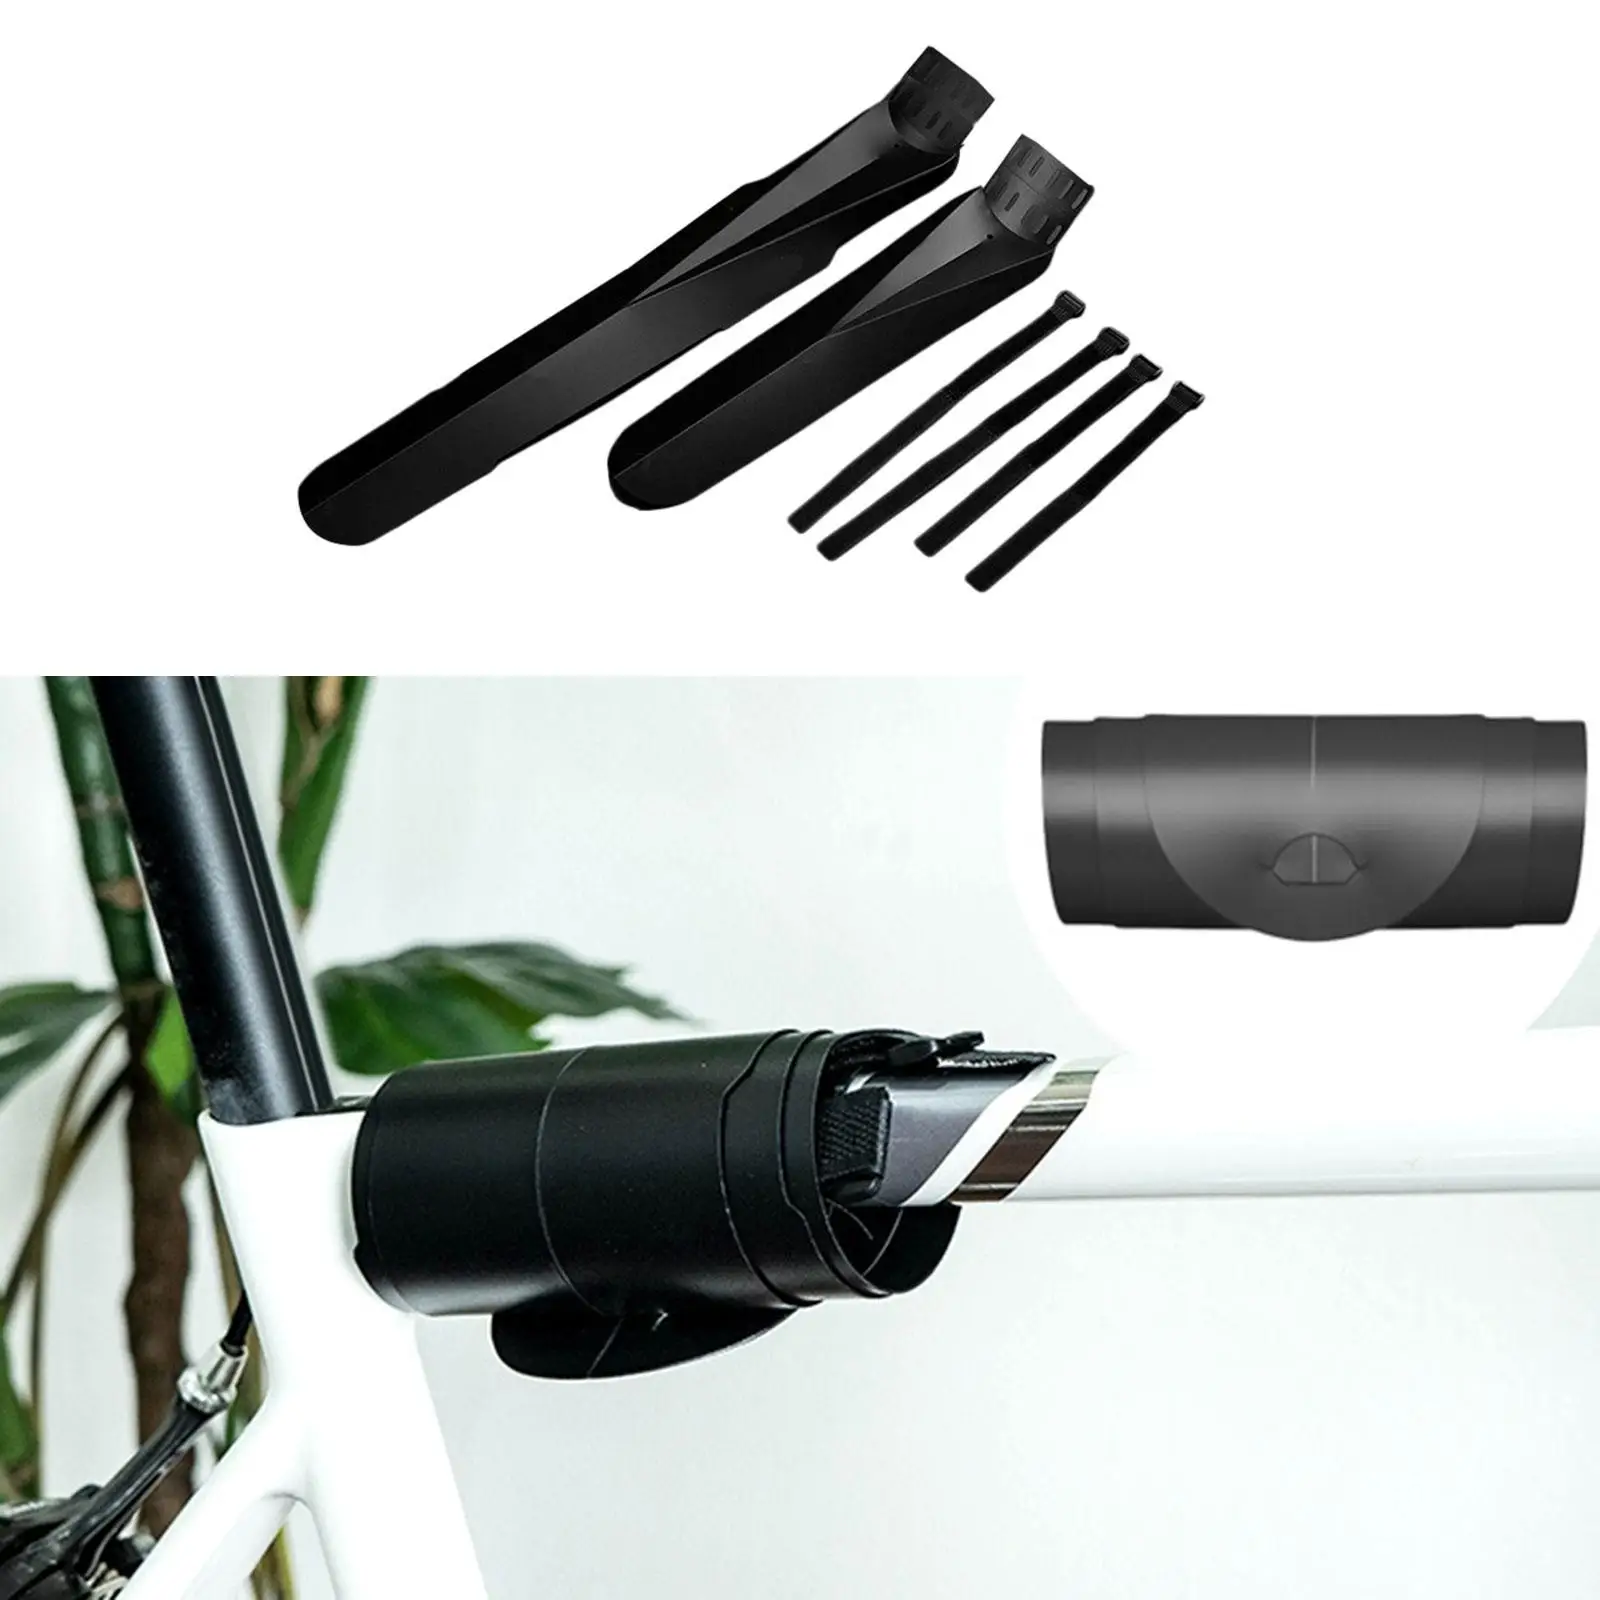 Front Rear Set Foldable Accessories Bike Mudguard for Mountain Bike Riding